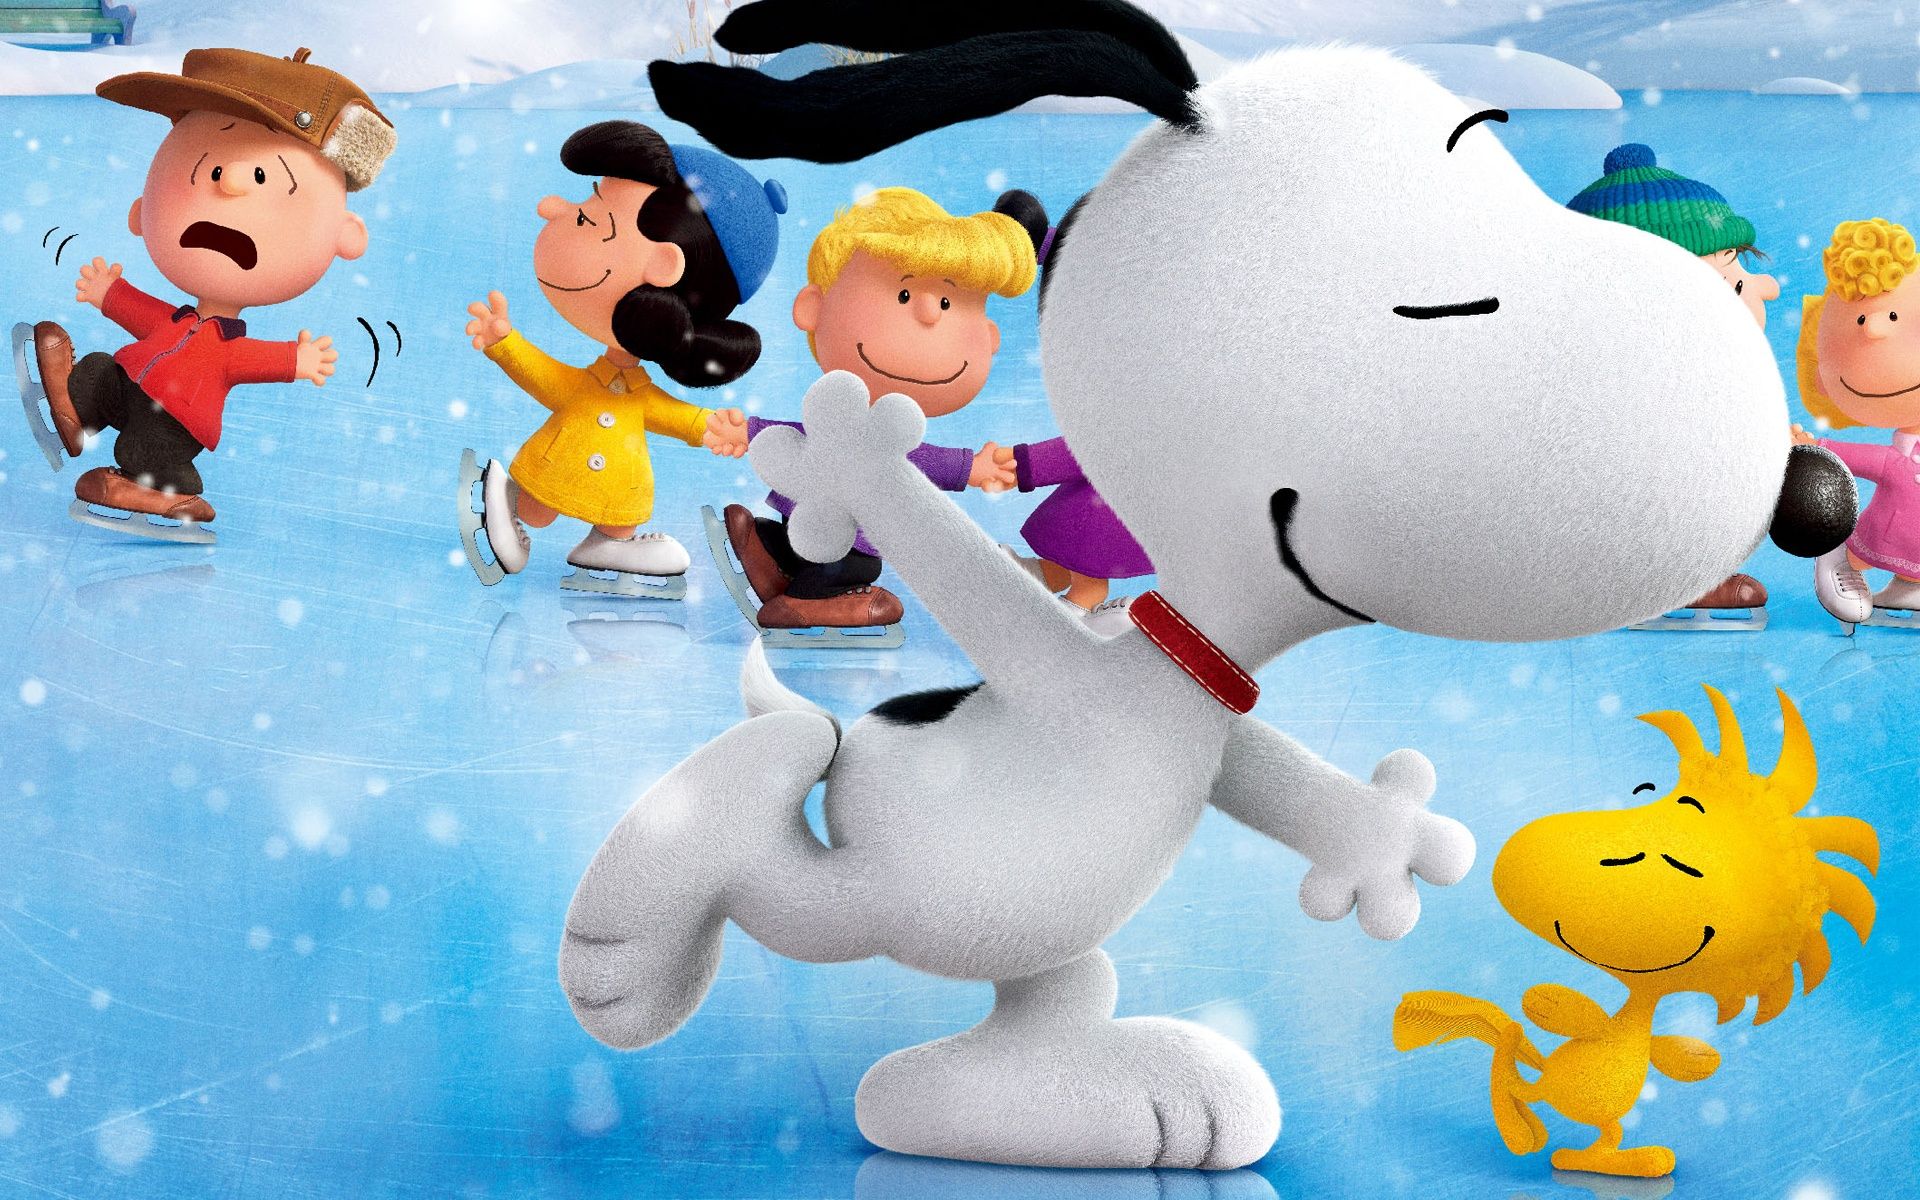 The Peanuts Movie 2015 Wallpaper in jpg format for free download